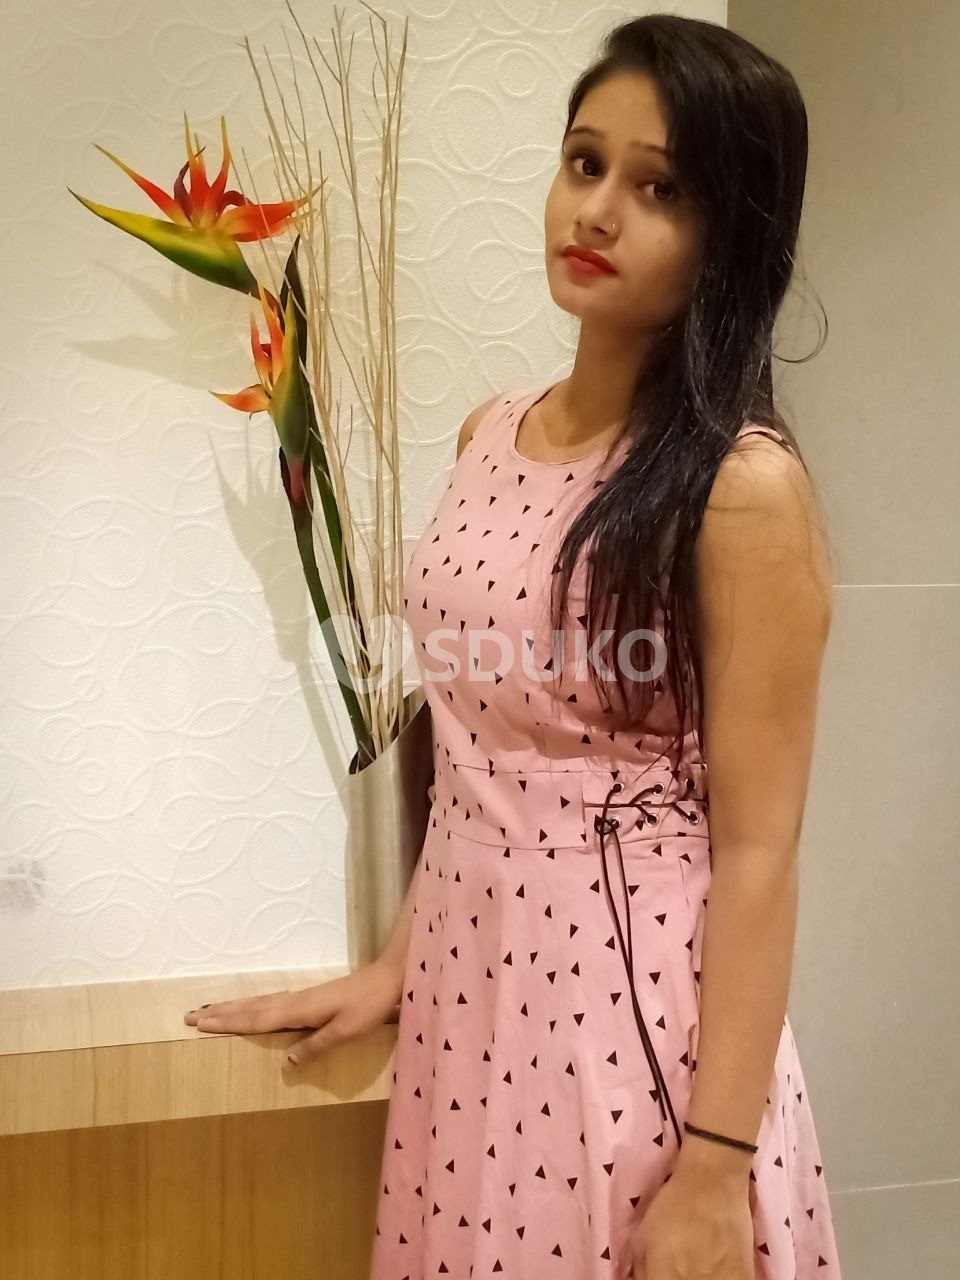 DOMLUR AVAILABLE BEST HIGH PROFILE CALL GIRL INCALL OUTCALL SERVICE LOW RATE